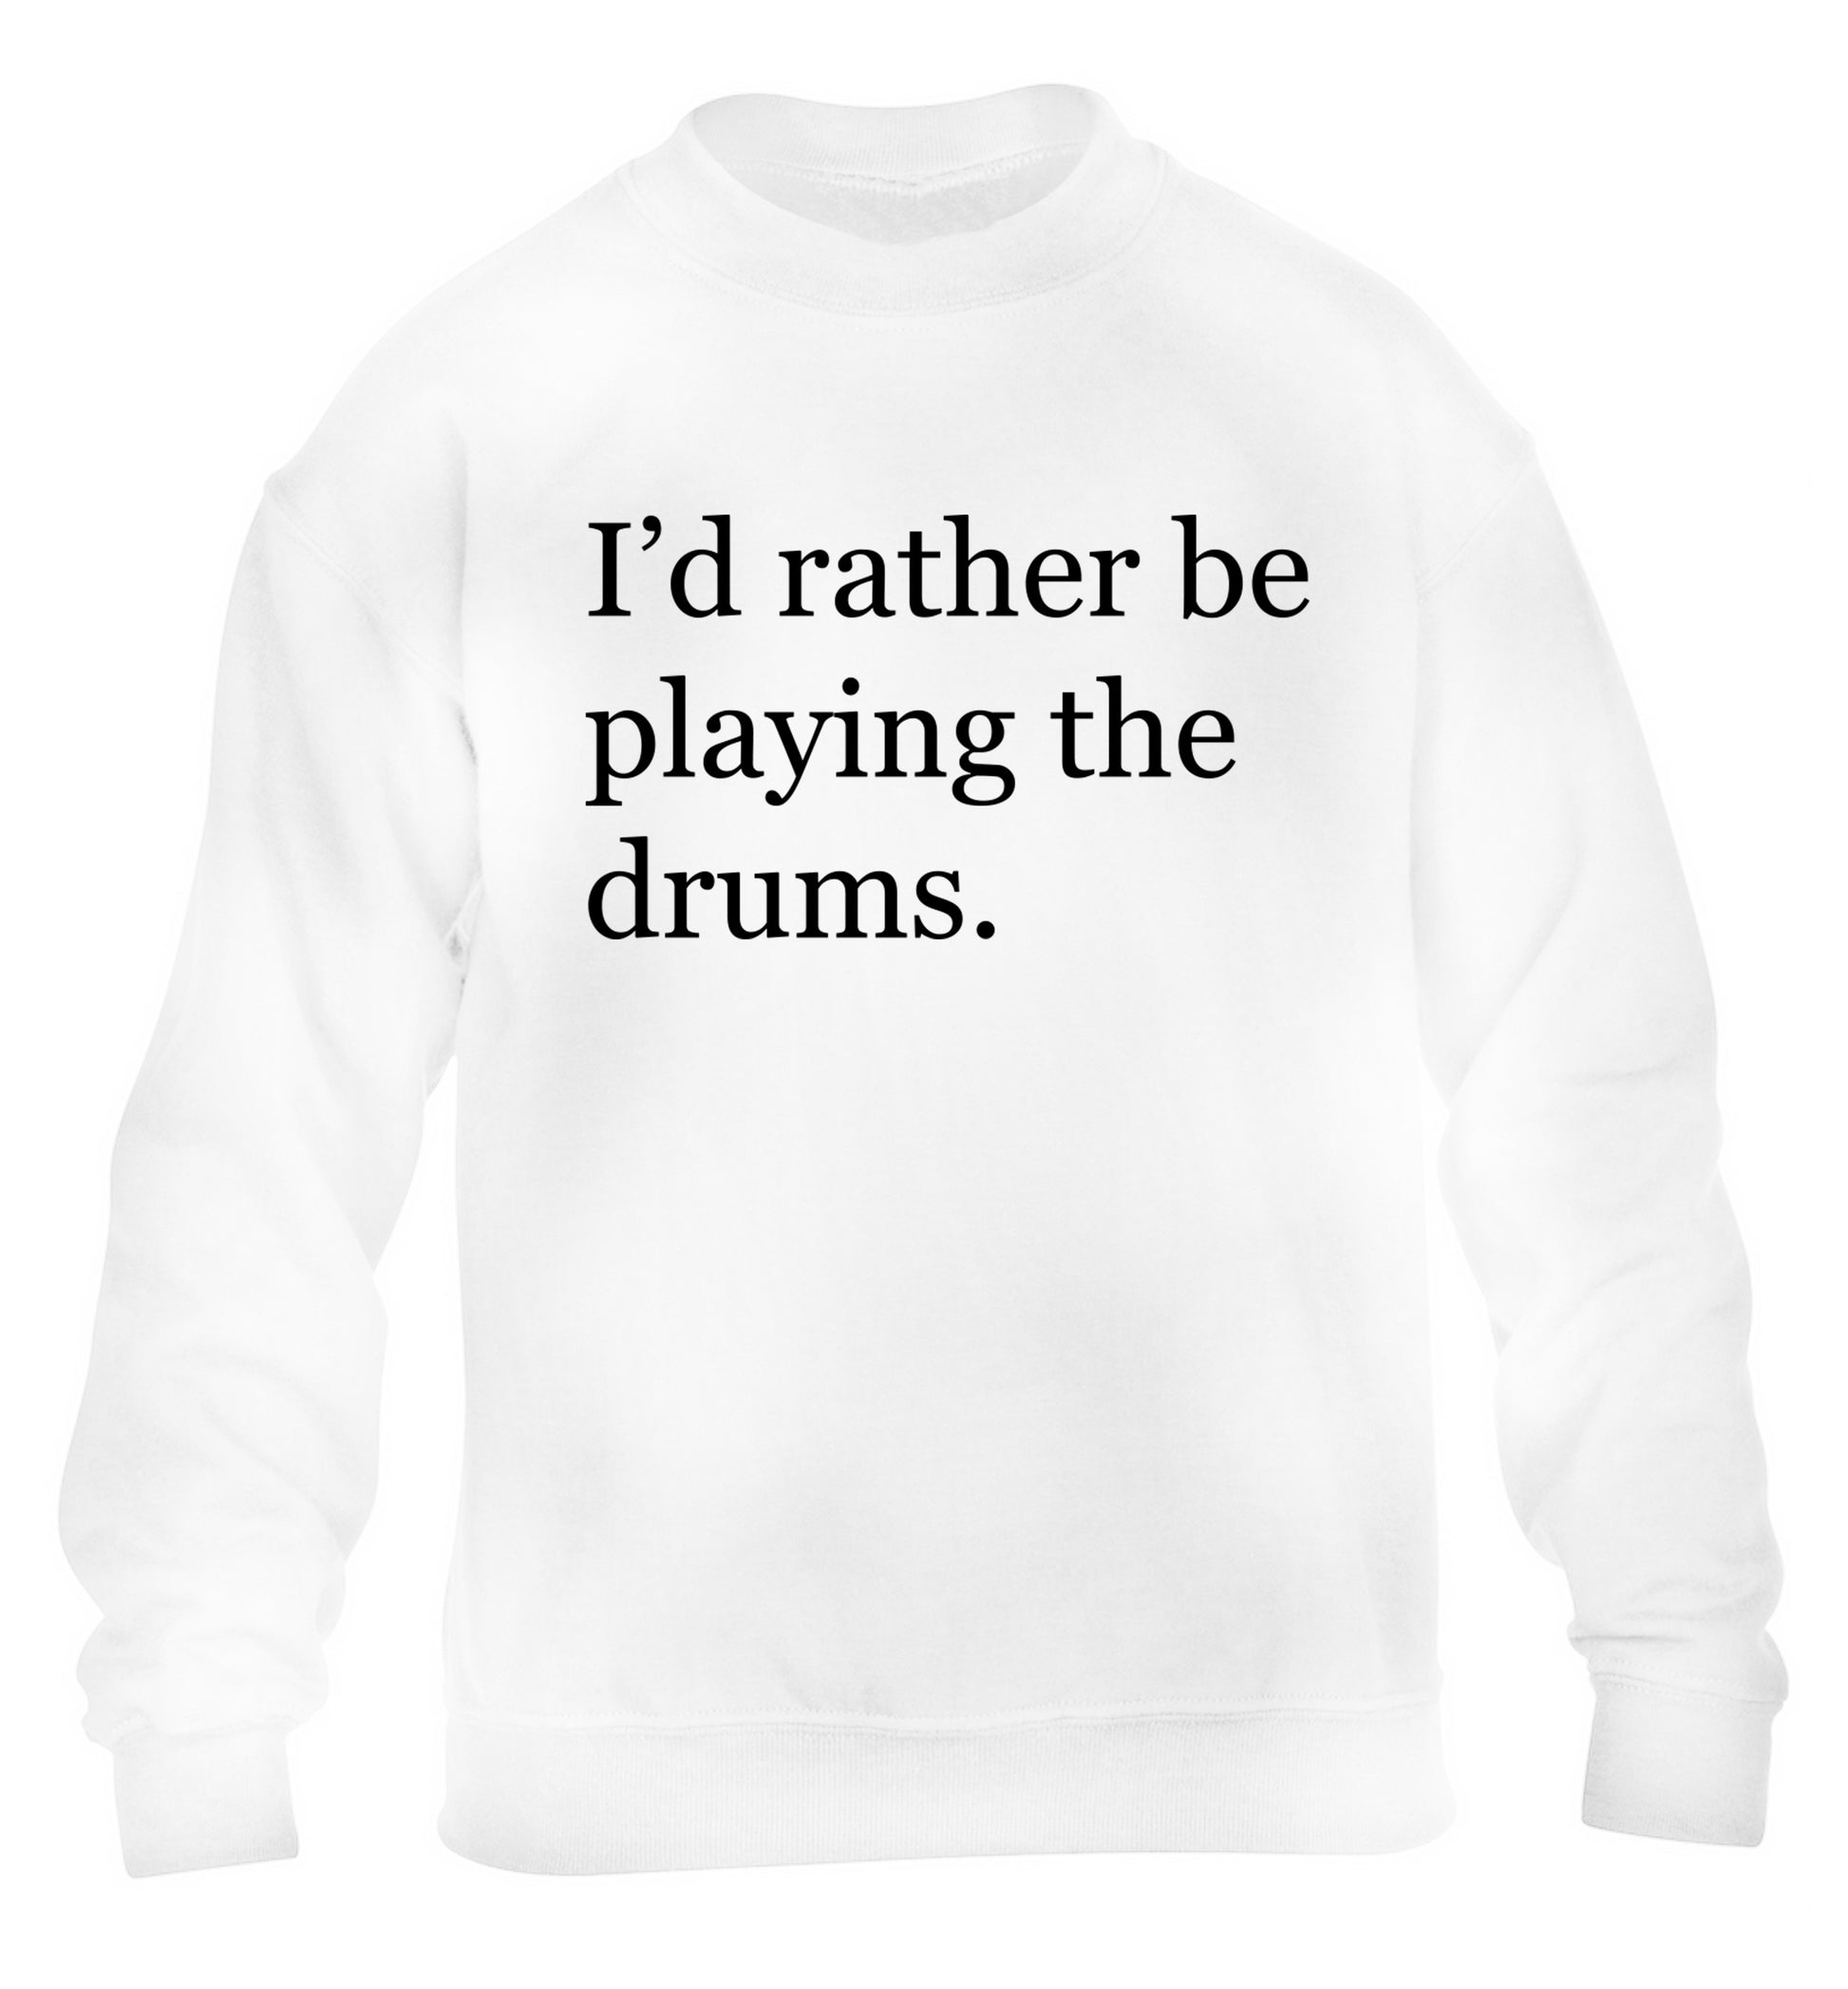 I'd rather be playing the drums children's white sweater 12-14 Years